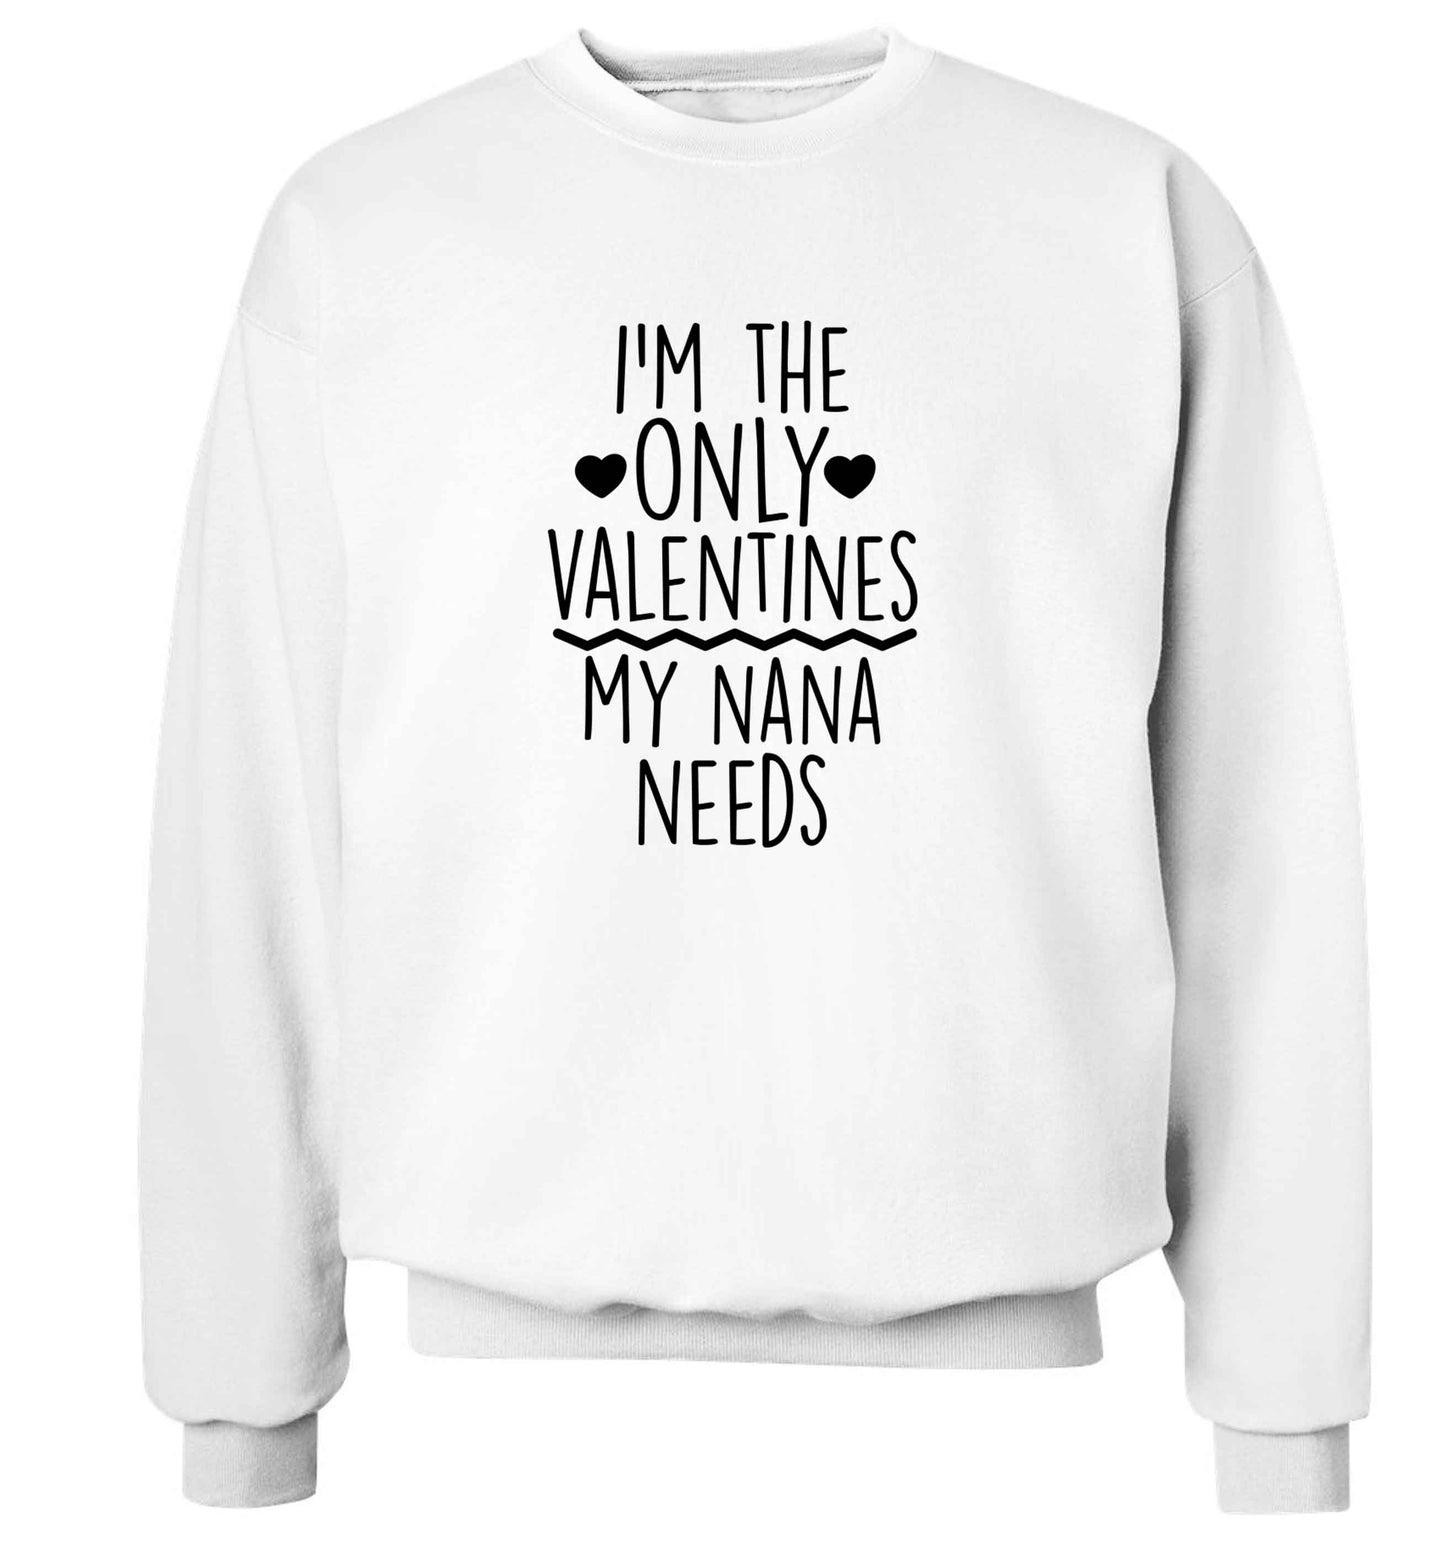 I'm the only valentines my nana needs adult's unisex white sweater 2XL